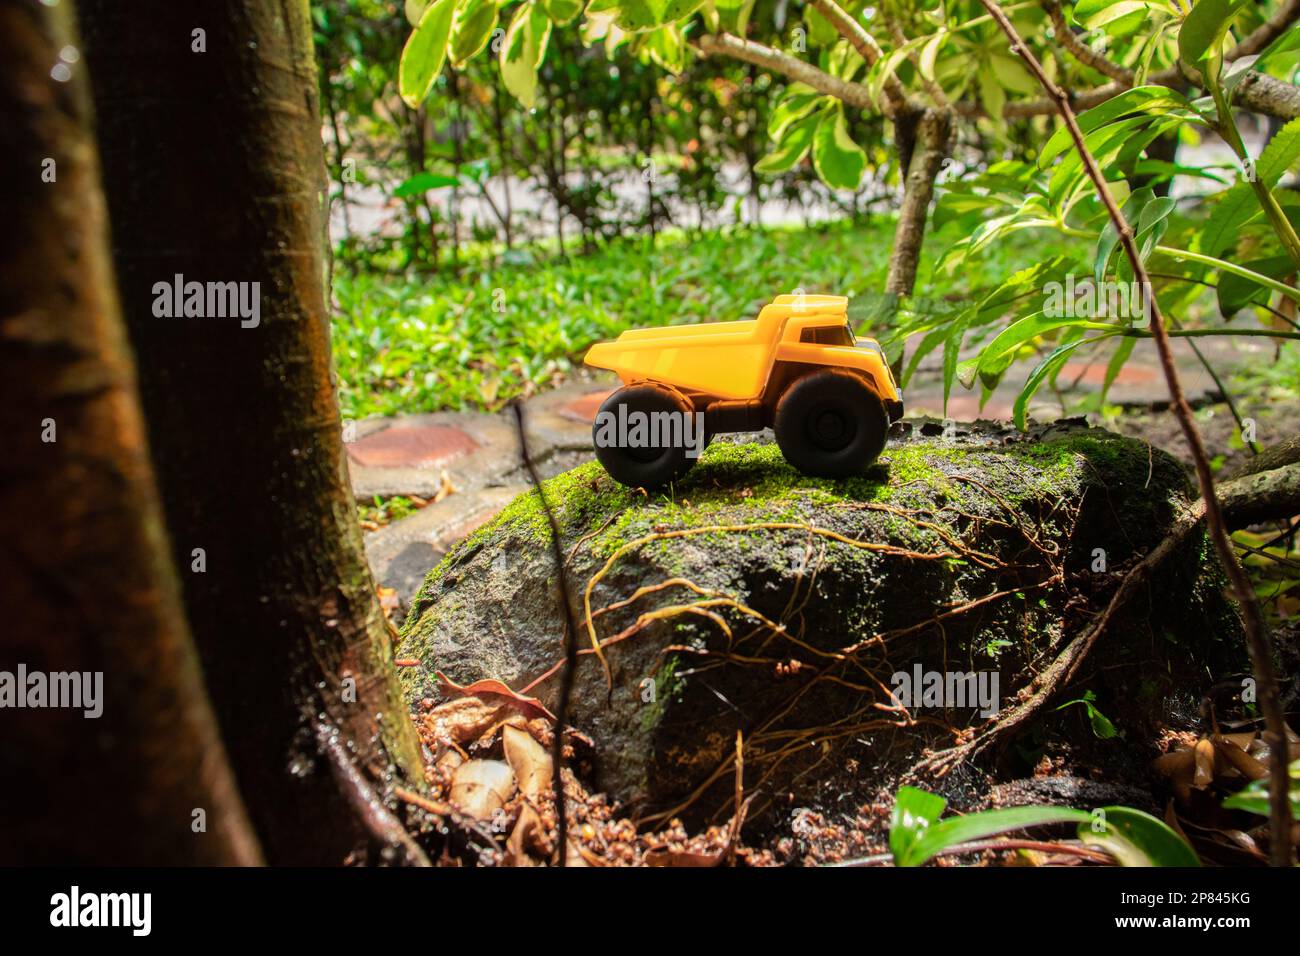 A photo after some edits. A yellow dump truck on a mossy stone. Stock Photo